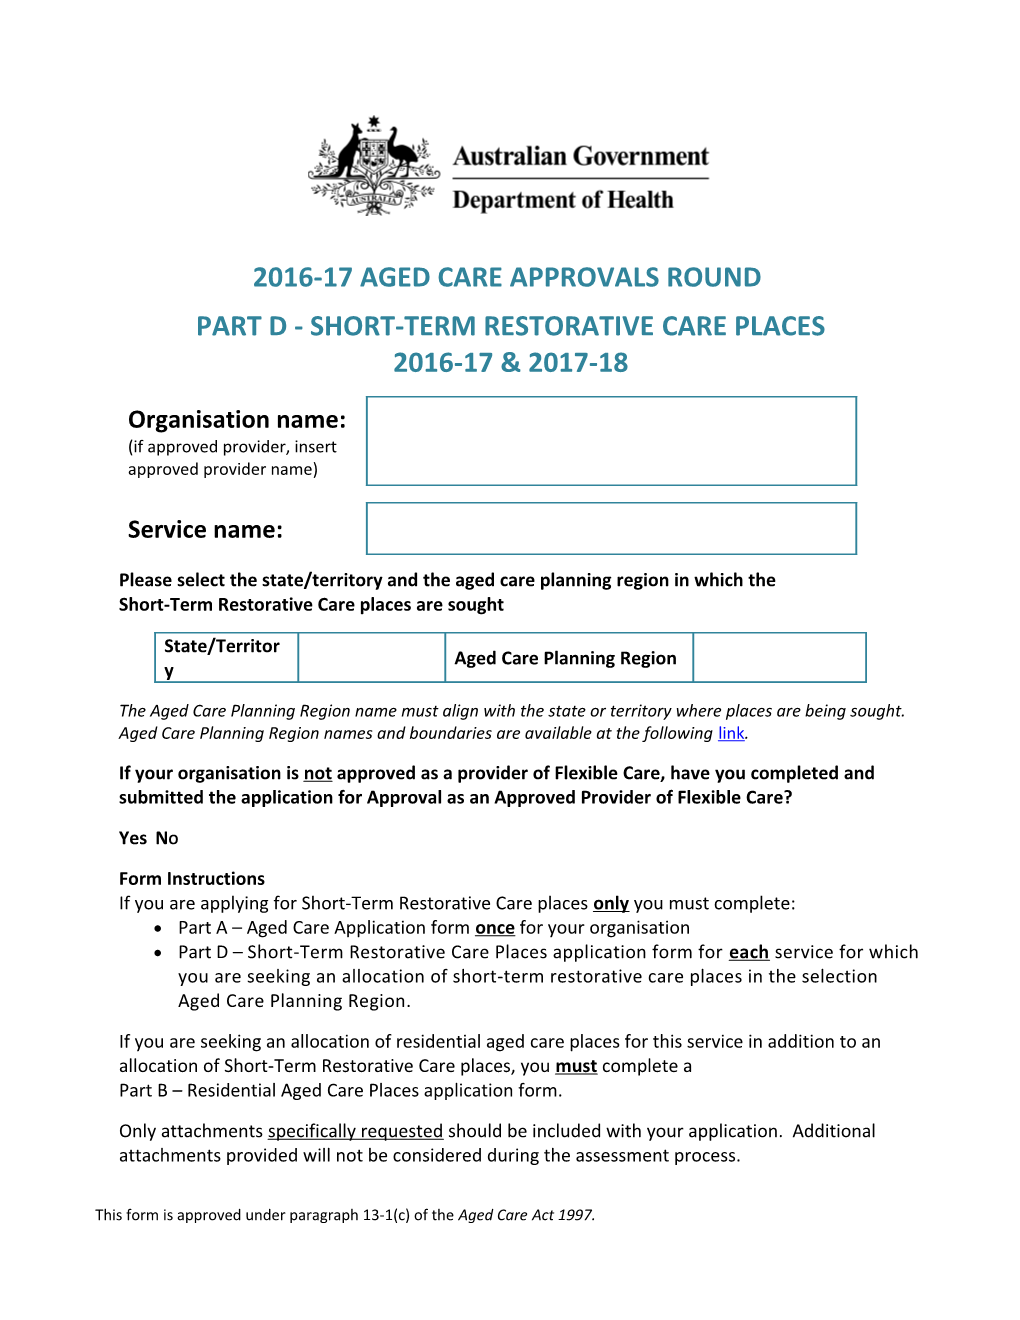 2016-17 Aged Care Approvals Round